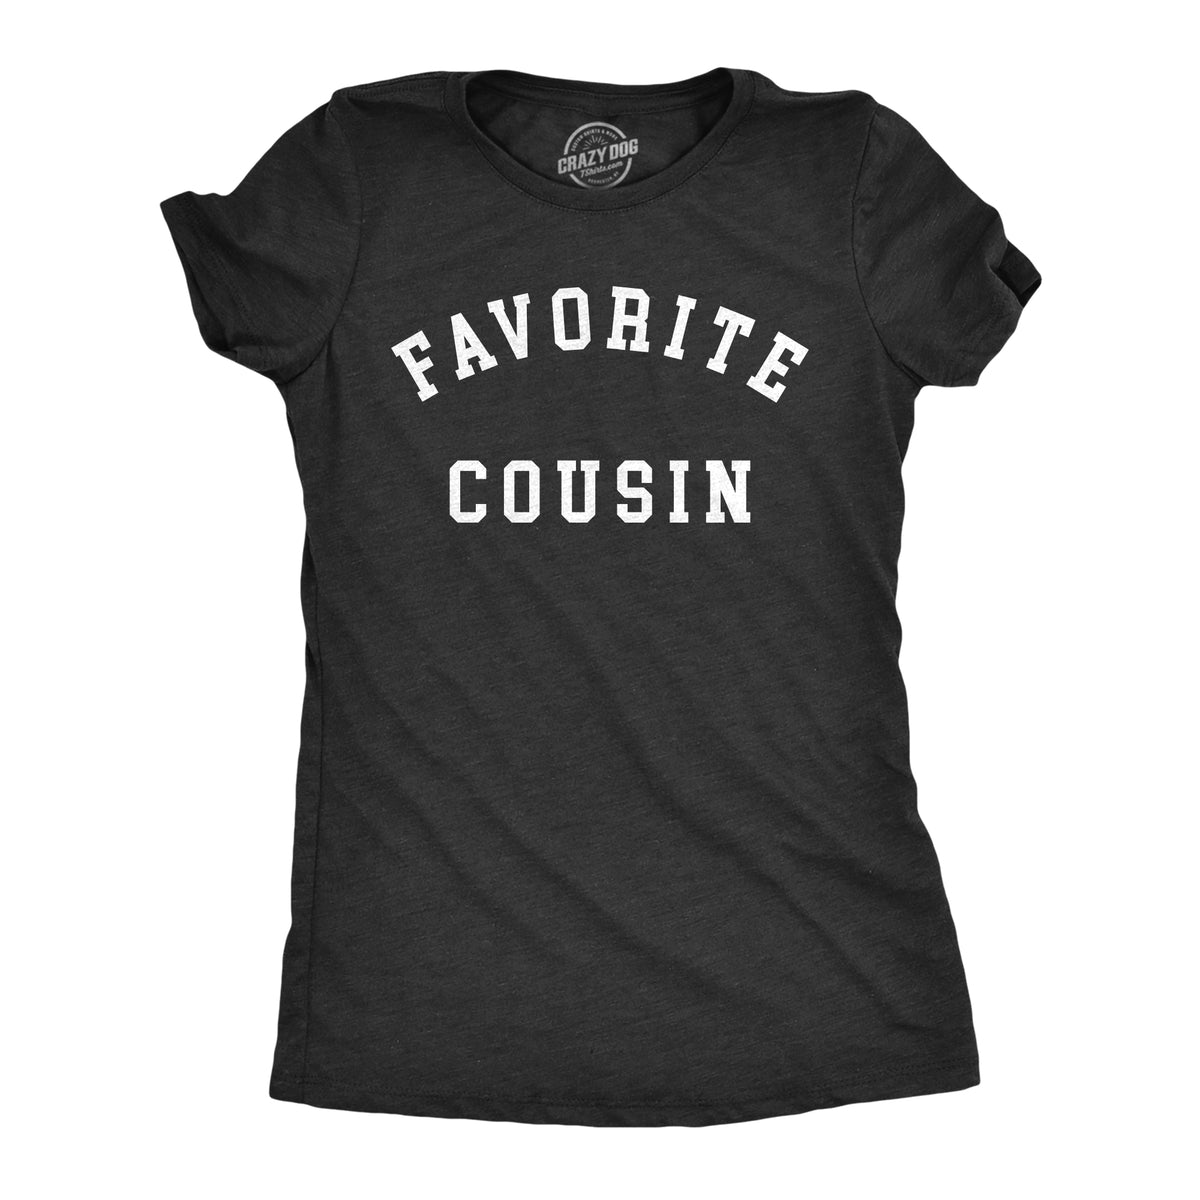 Funny Heather Black - Favorite Cousin Favorite Cousin Womens T Shirt Nerdy Sarcastic Tee